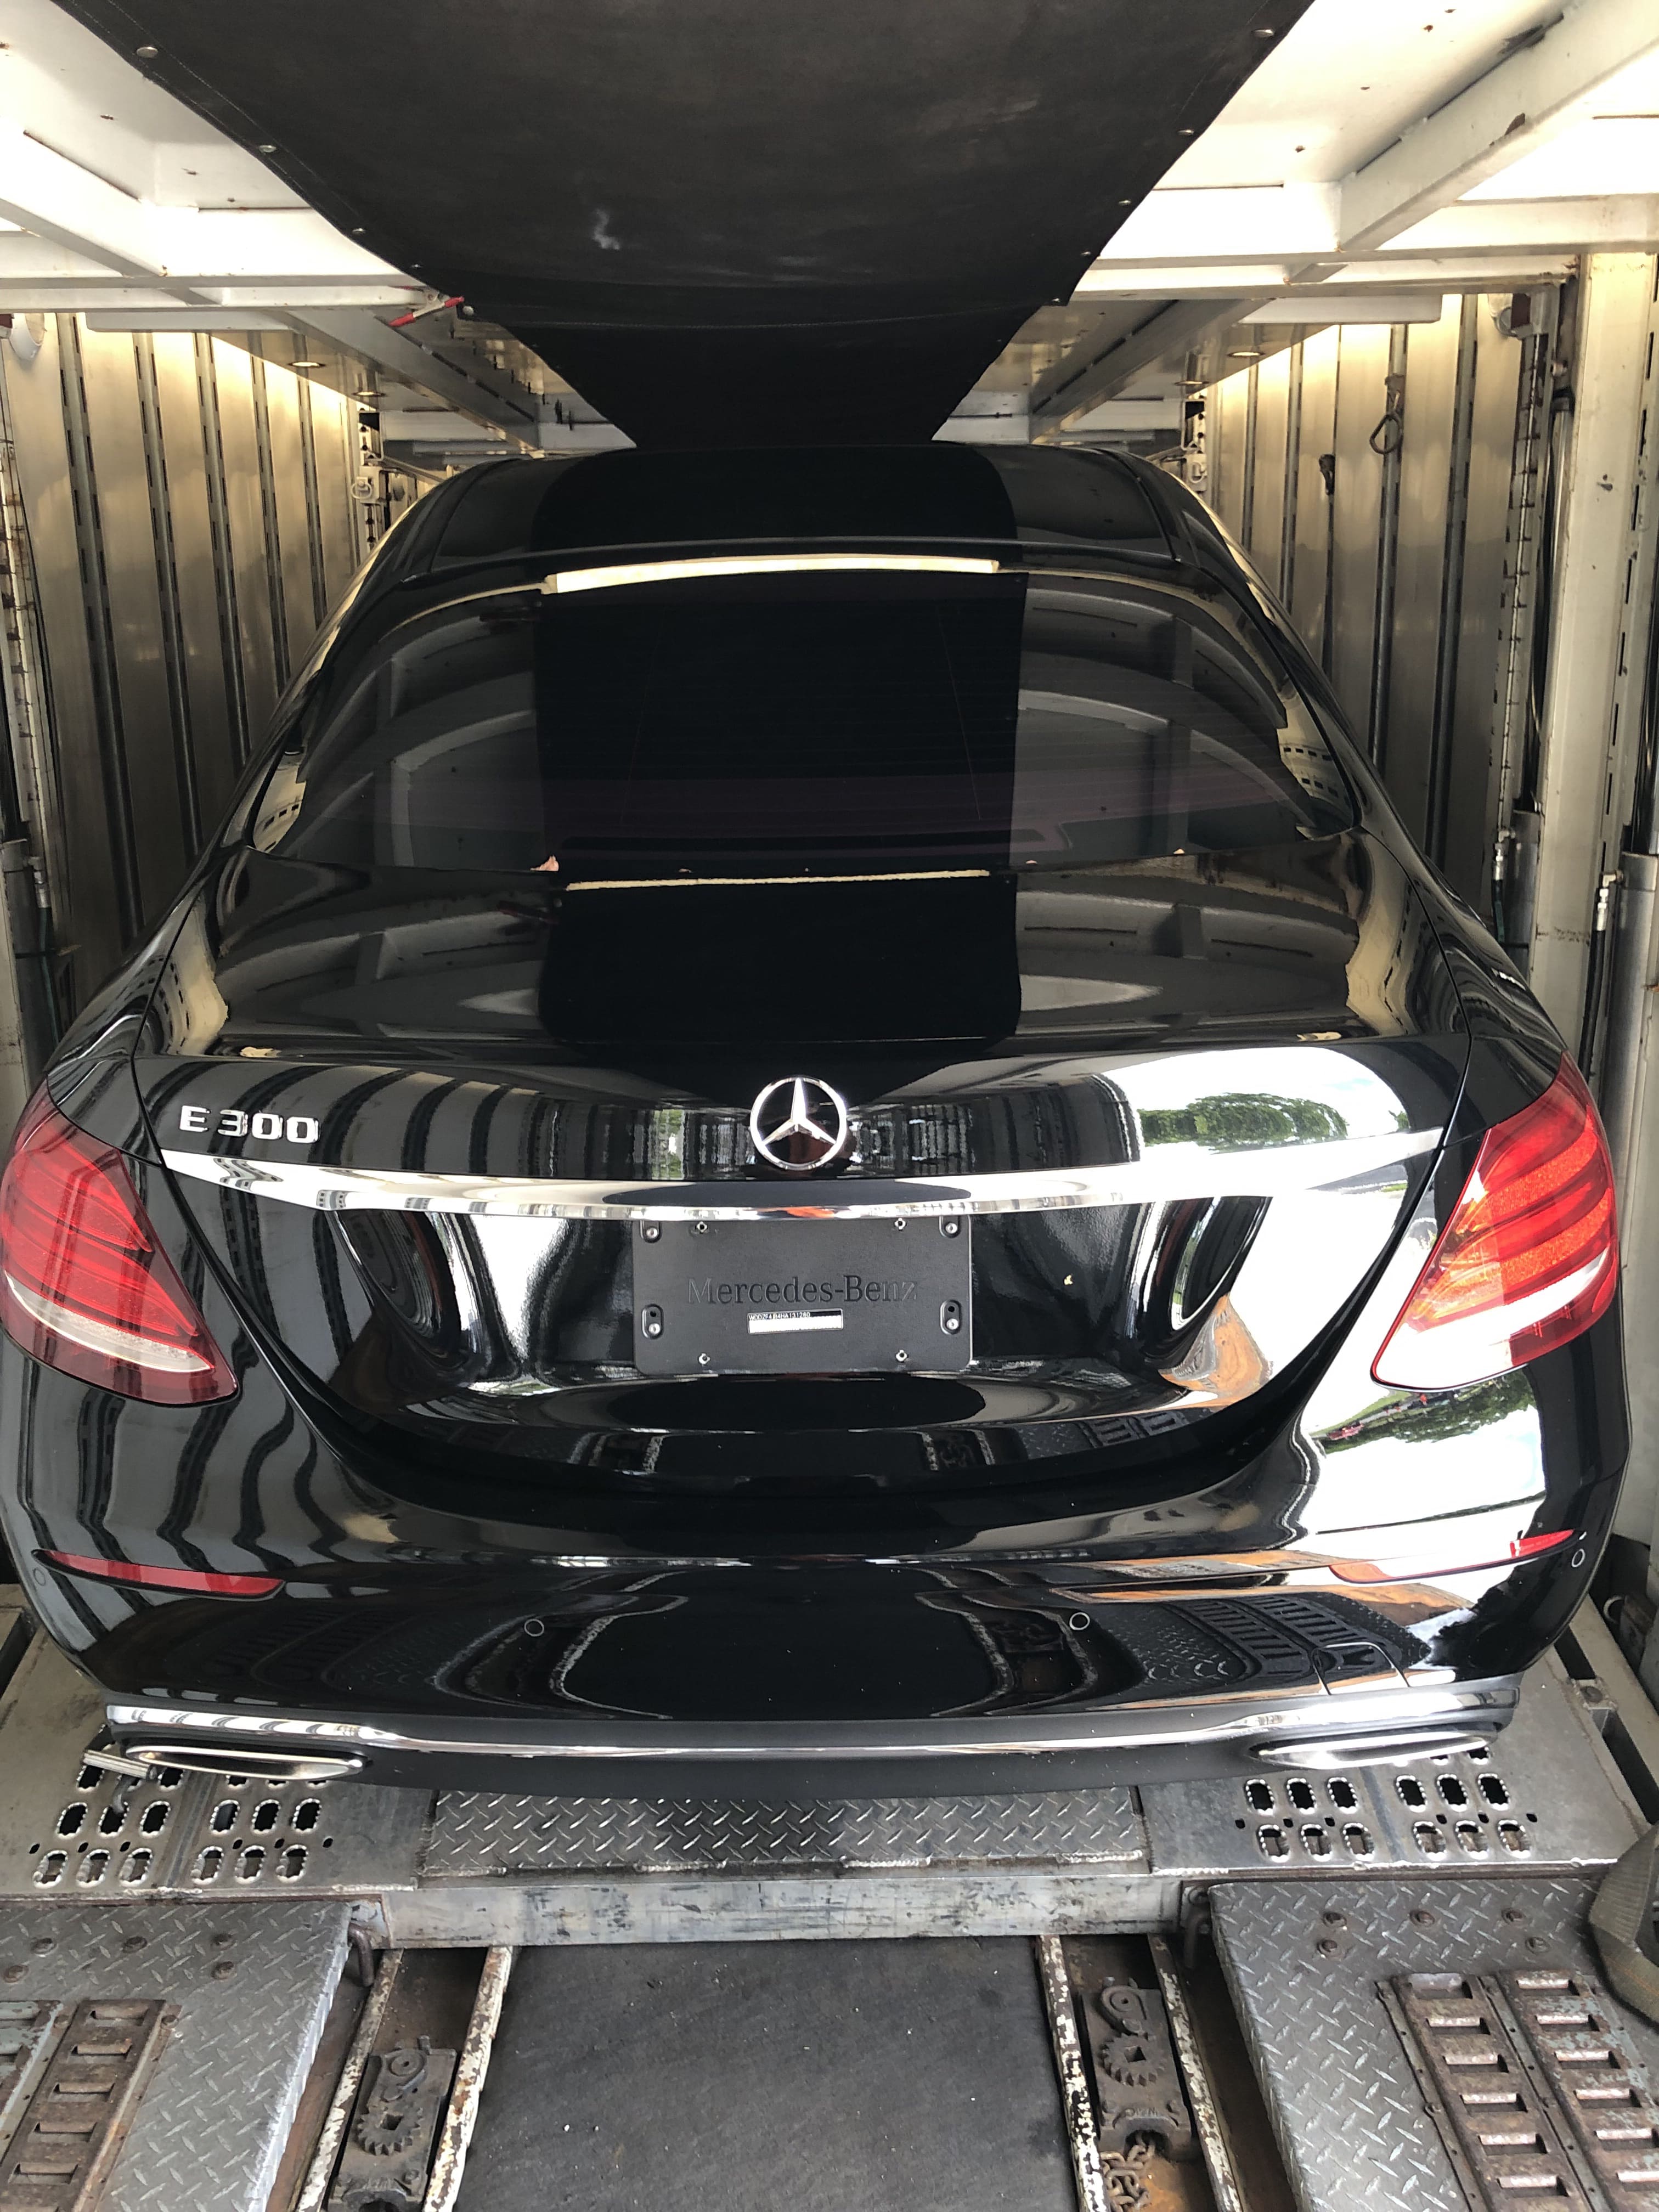  Enclosed Shipping protects luxury cars 